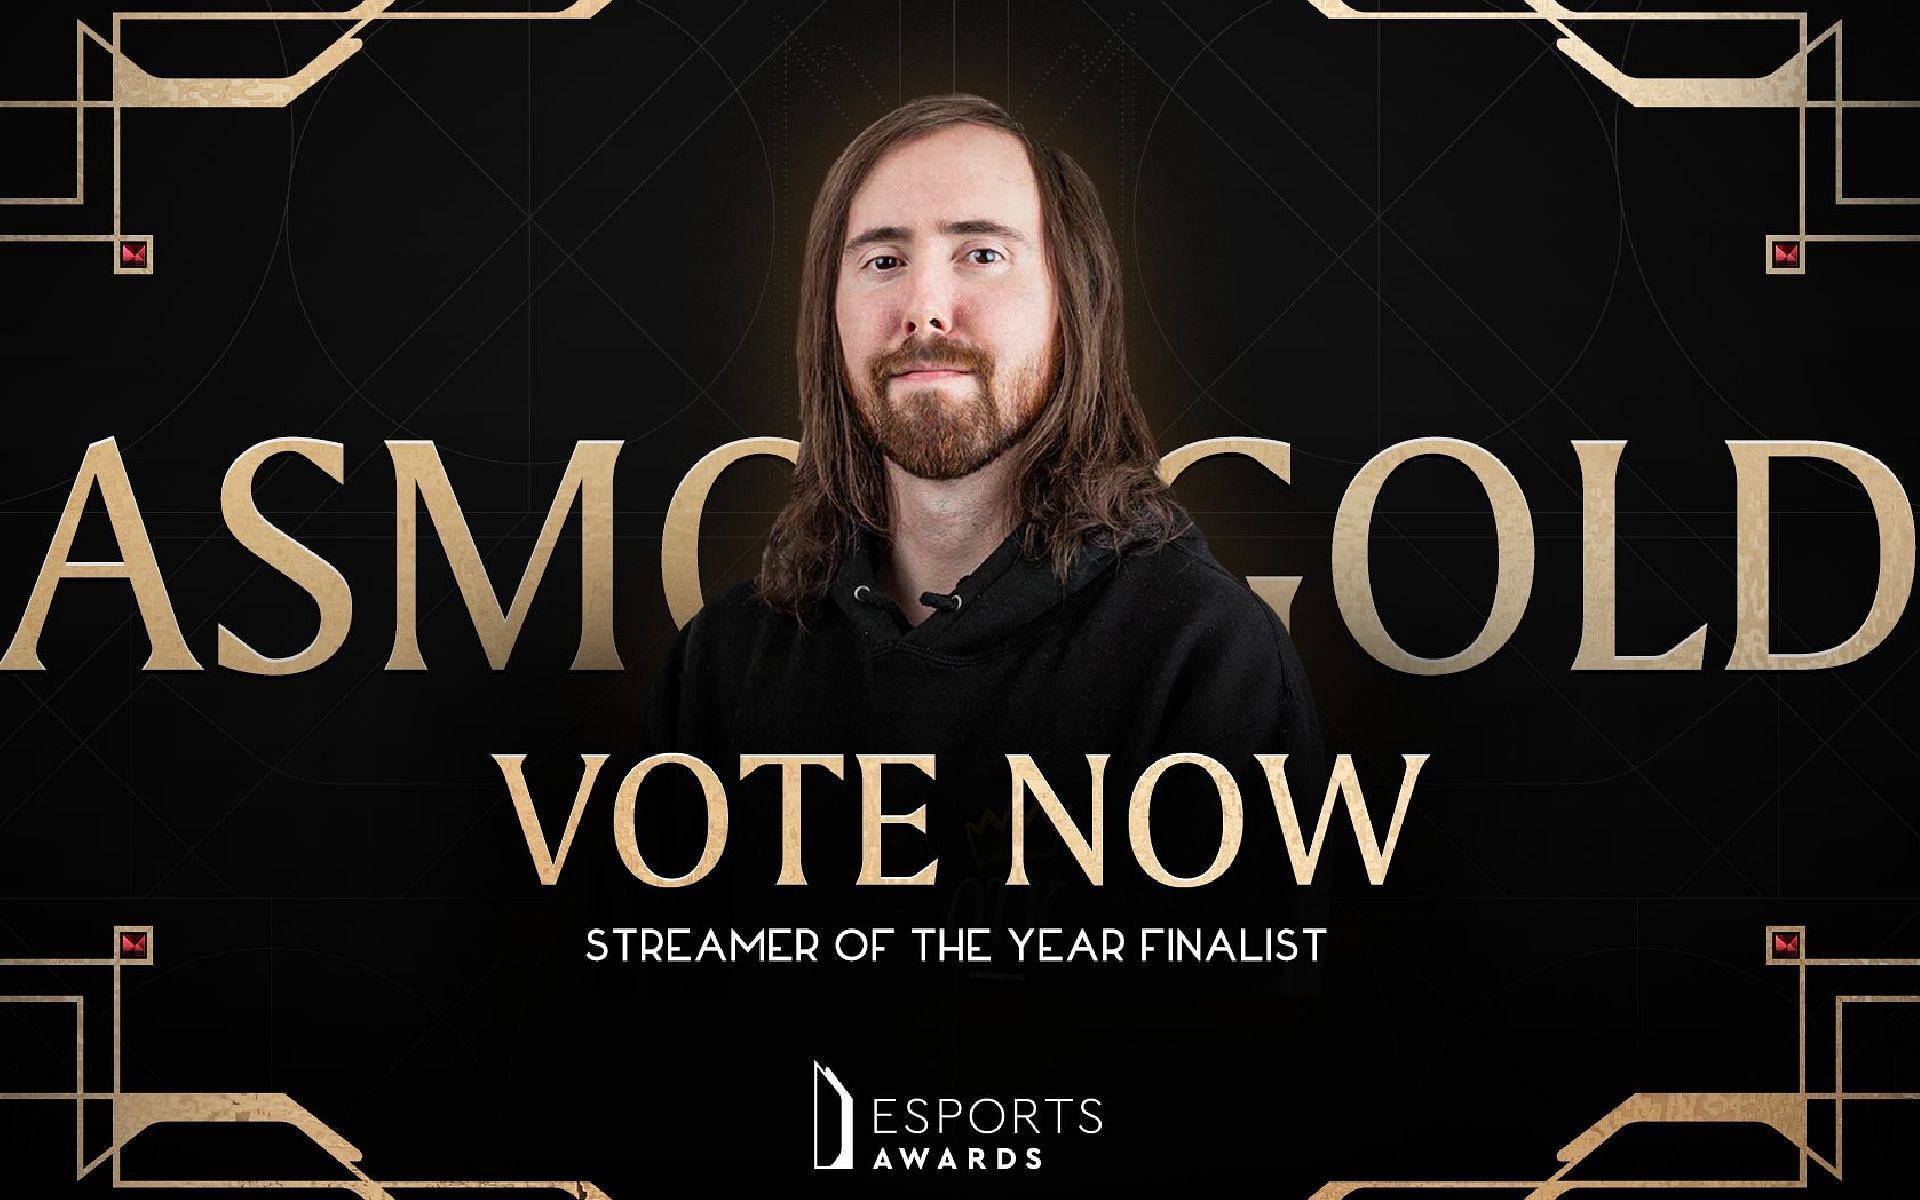 Asmongold has been nominated for Streamer of the Year at the Esports Awards 2022 (Image via Esports Awards/Twitter)